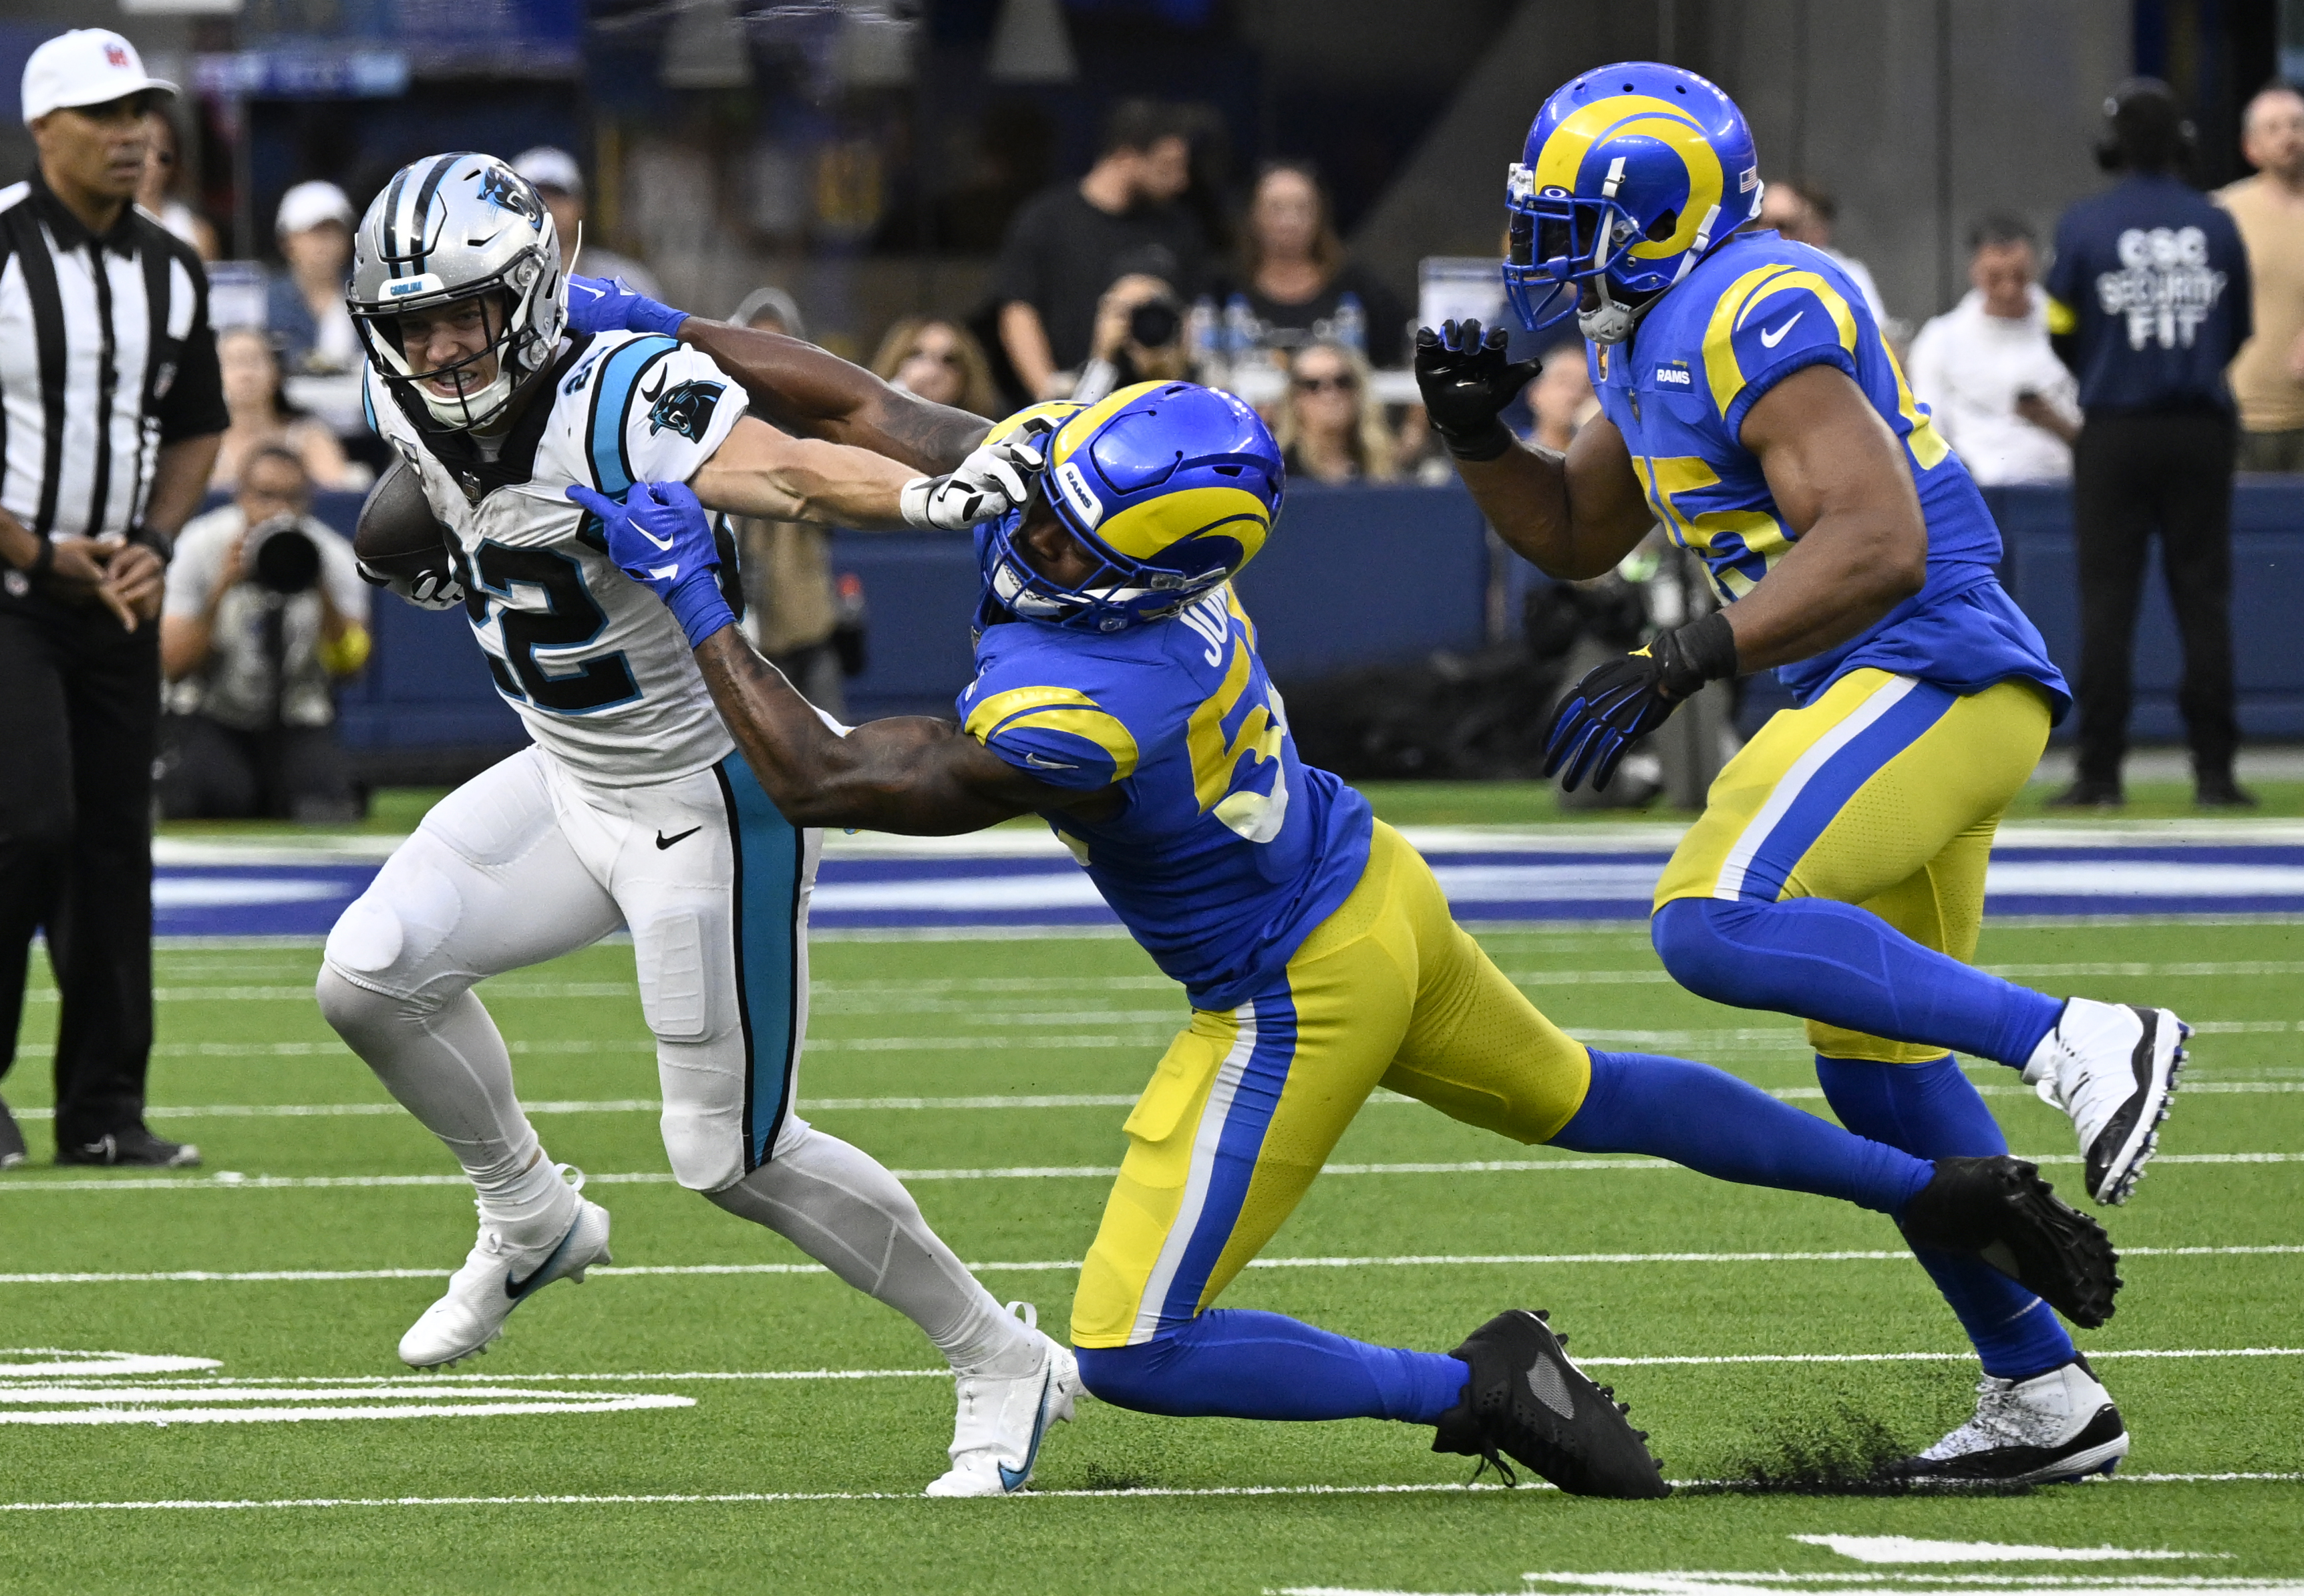 Running back Christian McCaffrey (L) of the Carolina Panthers tries to get rid of defense in the game against the Los Angeles Rams at SoFi Stadium in Inglewood, California, October 16, 2022. /CFP